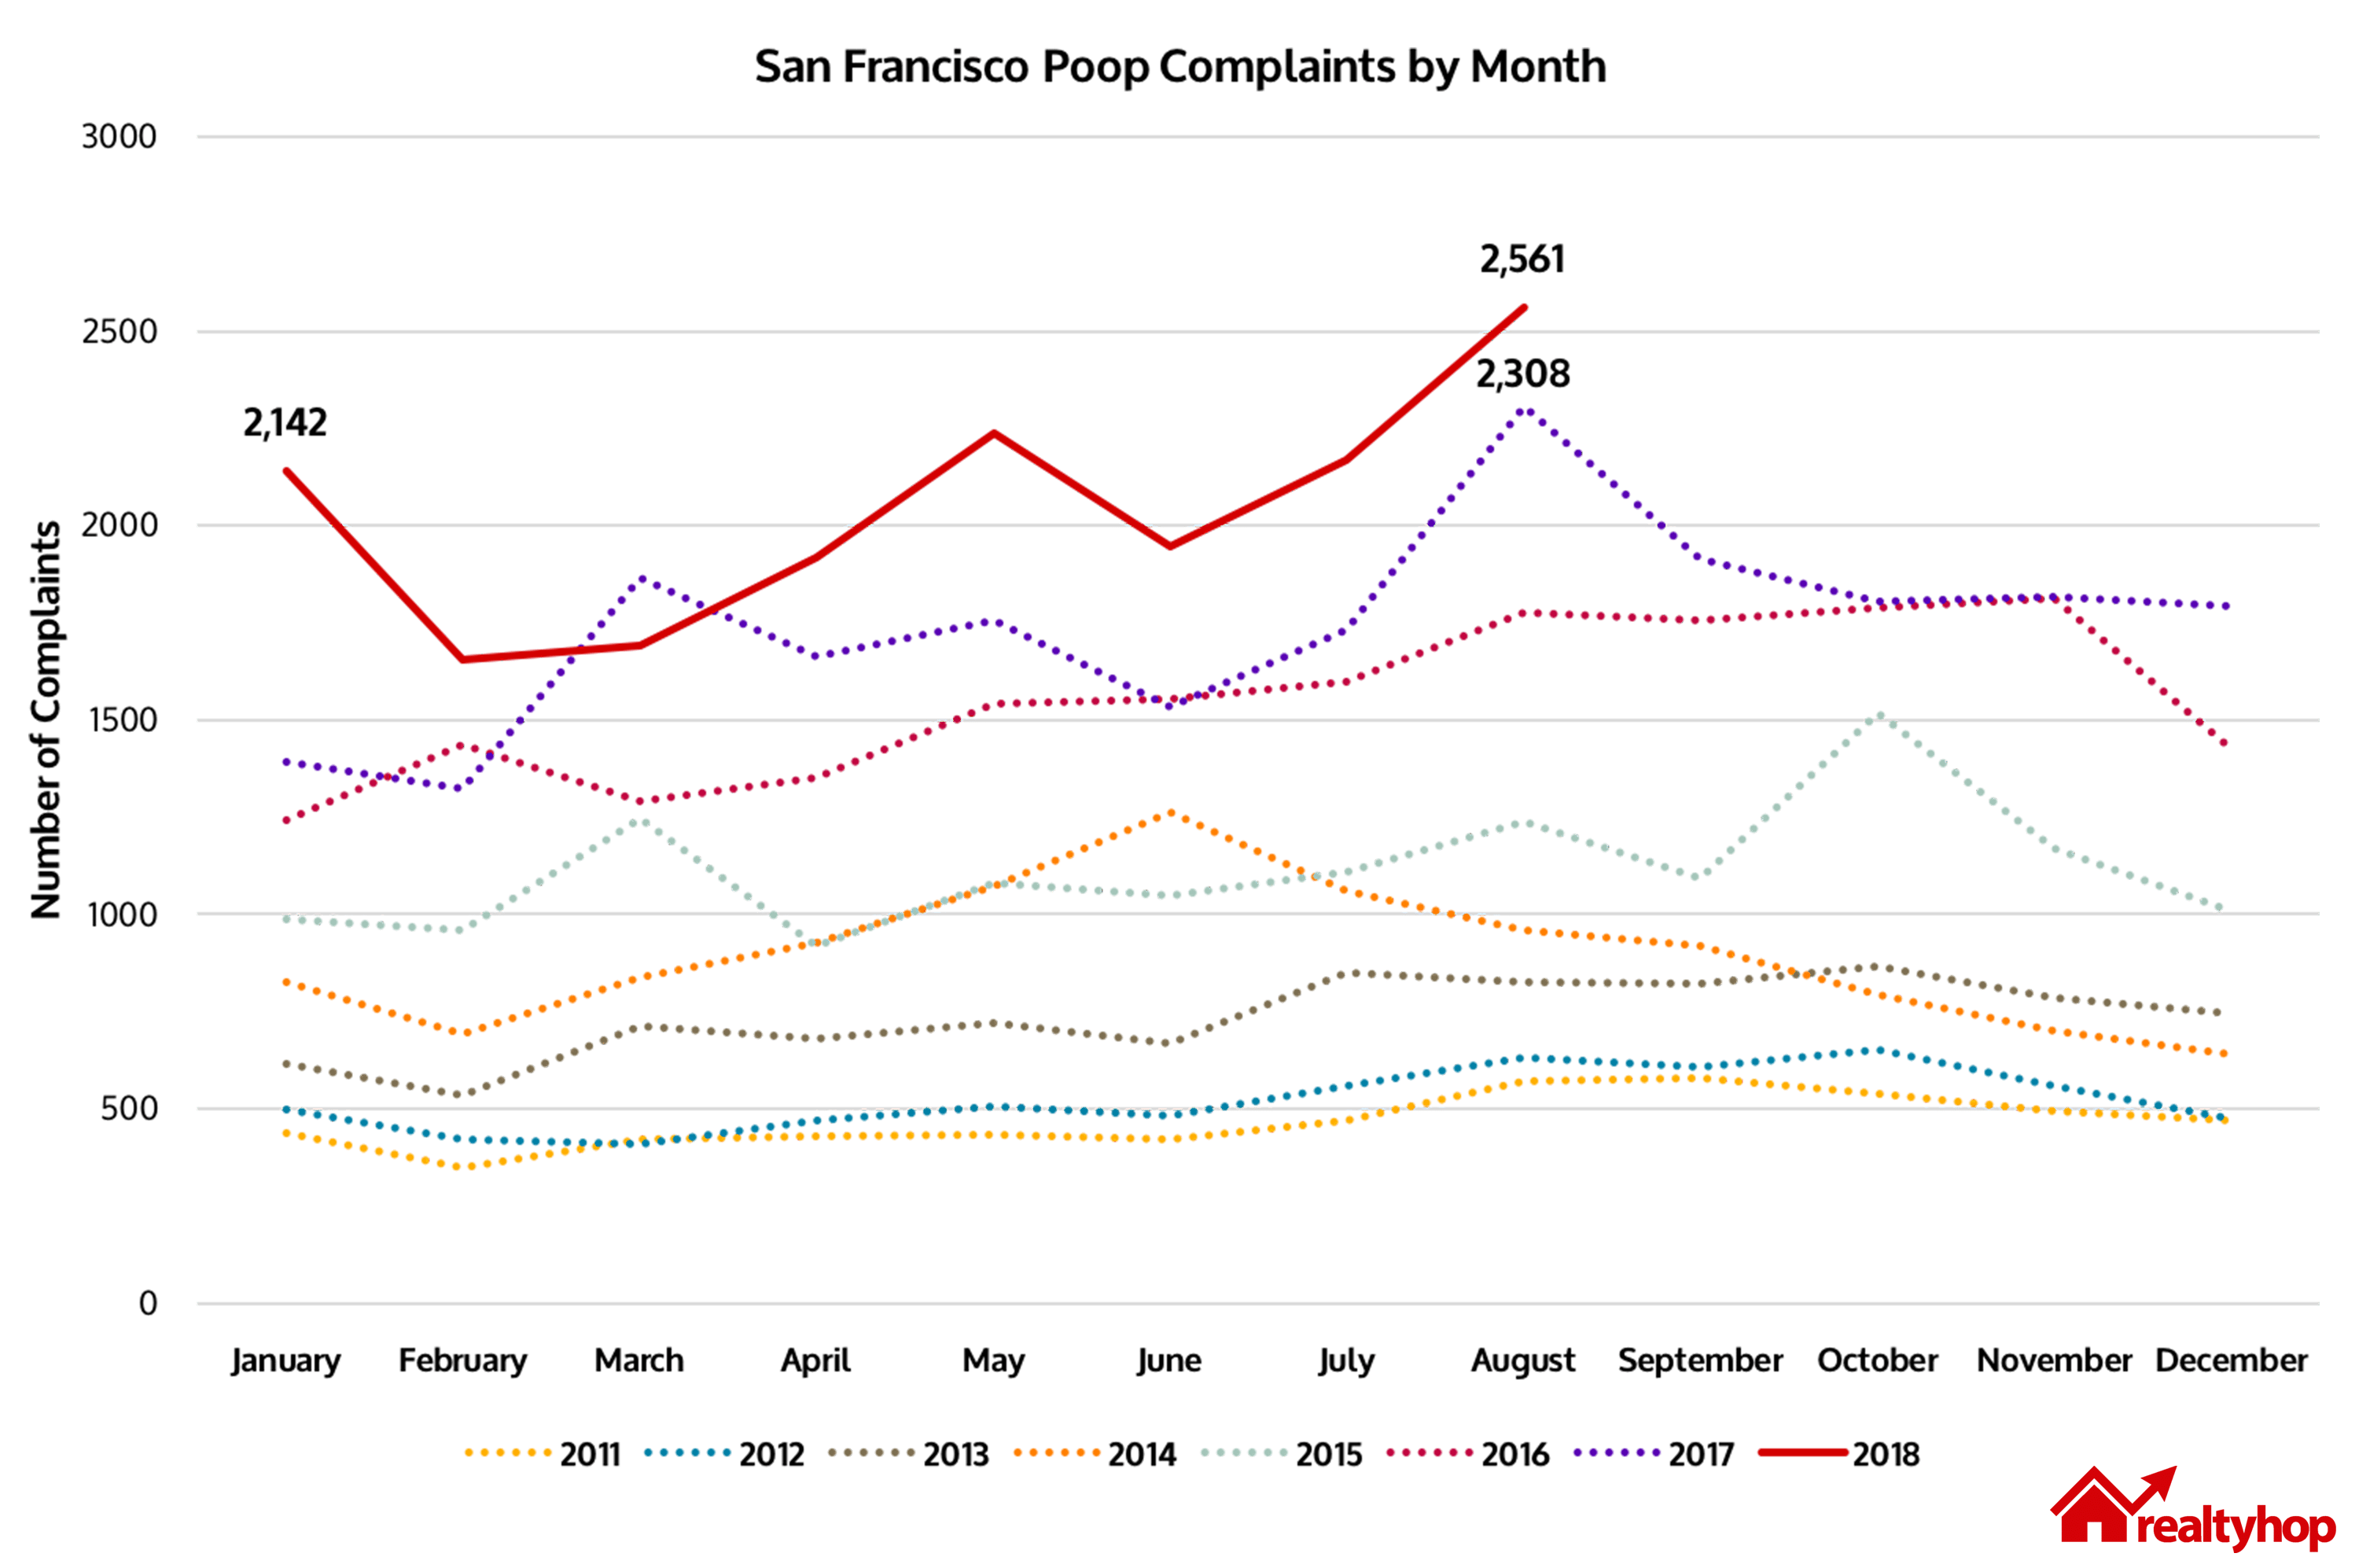 sf-poop-complaints-by-month